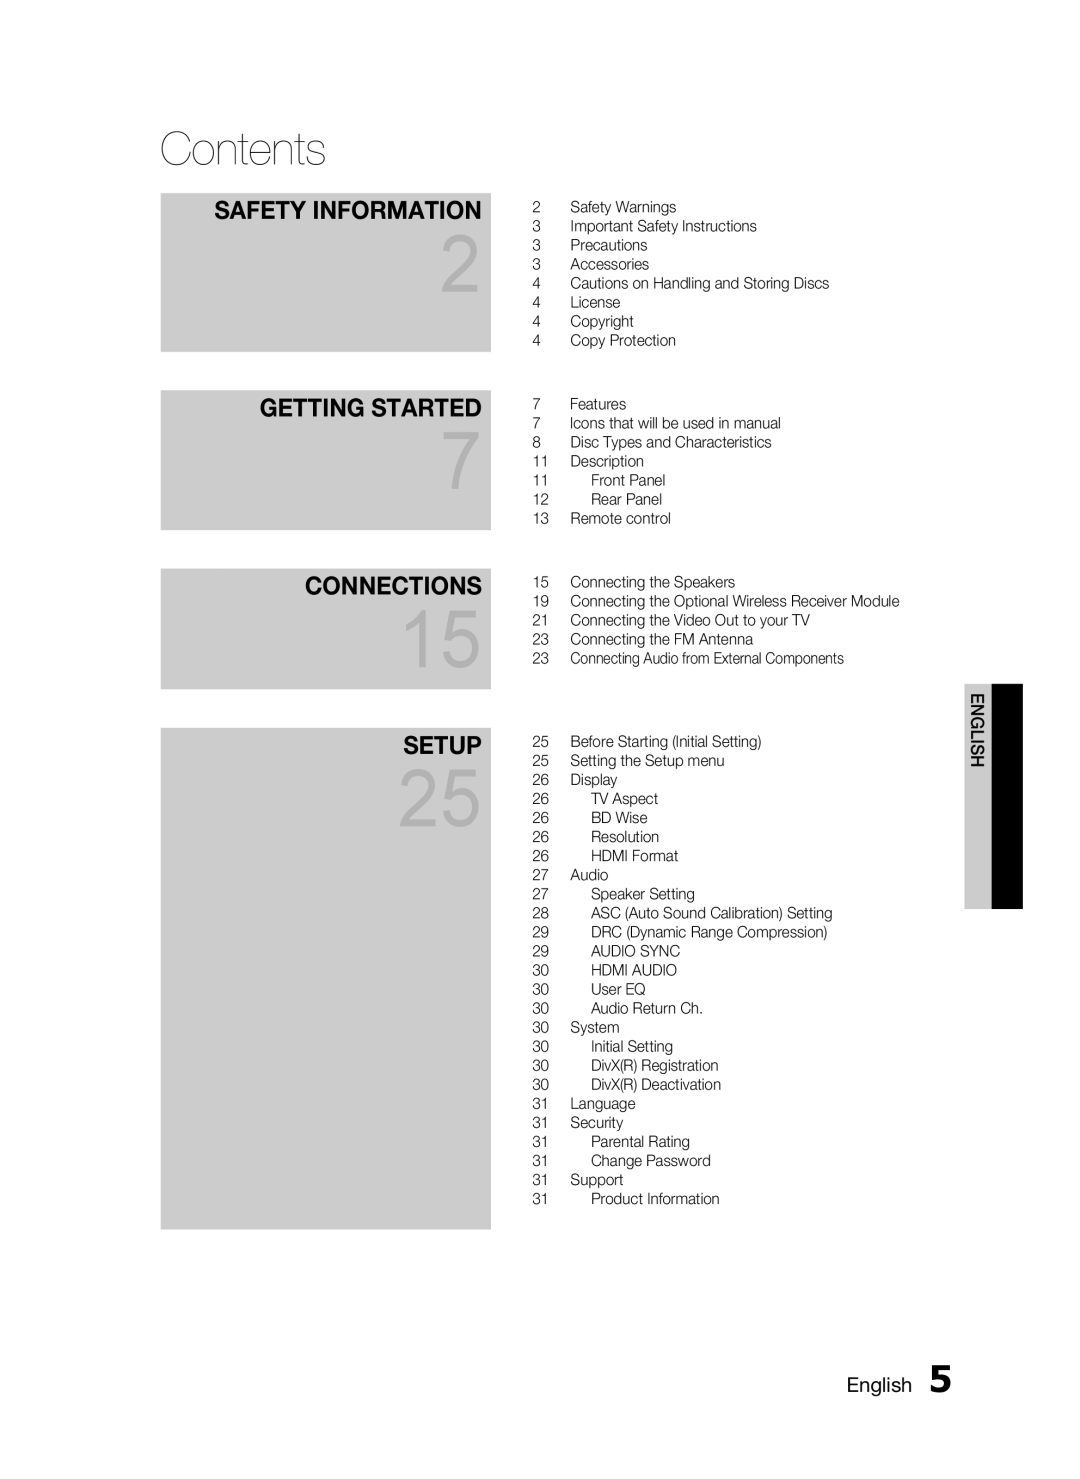 Samsung HT-D550, HT-D553, HT-D555 user manual Contents, Safety Information, Getting Started, Connections, Setup, English  